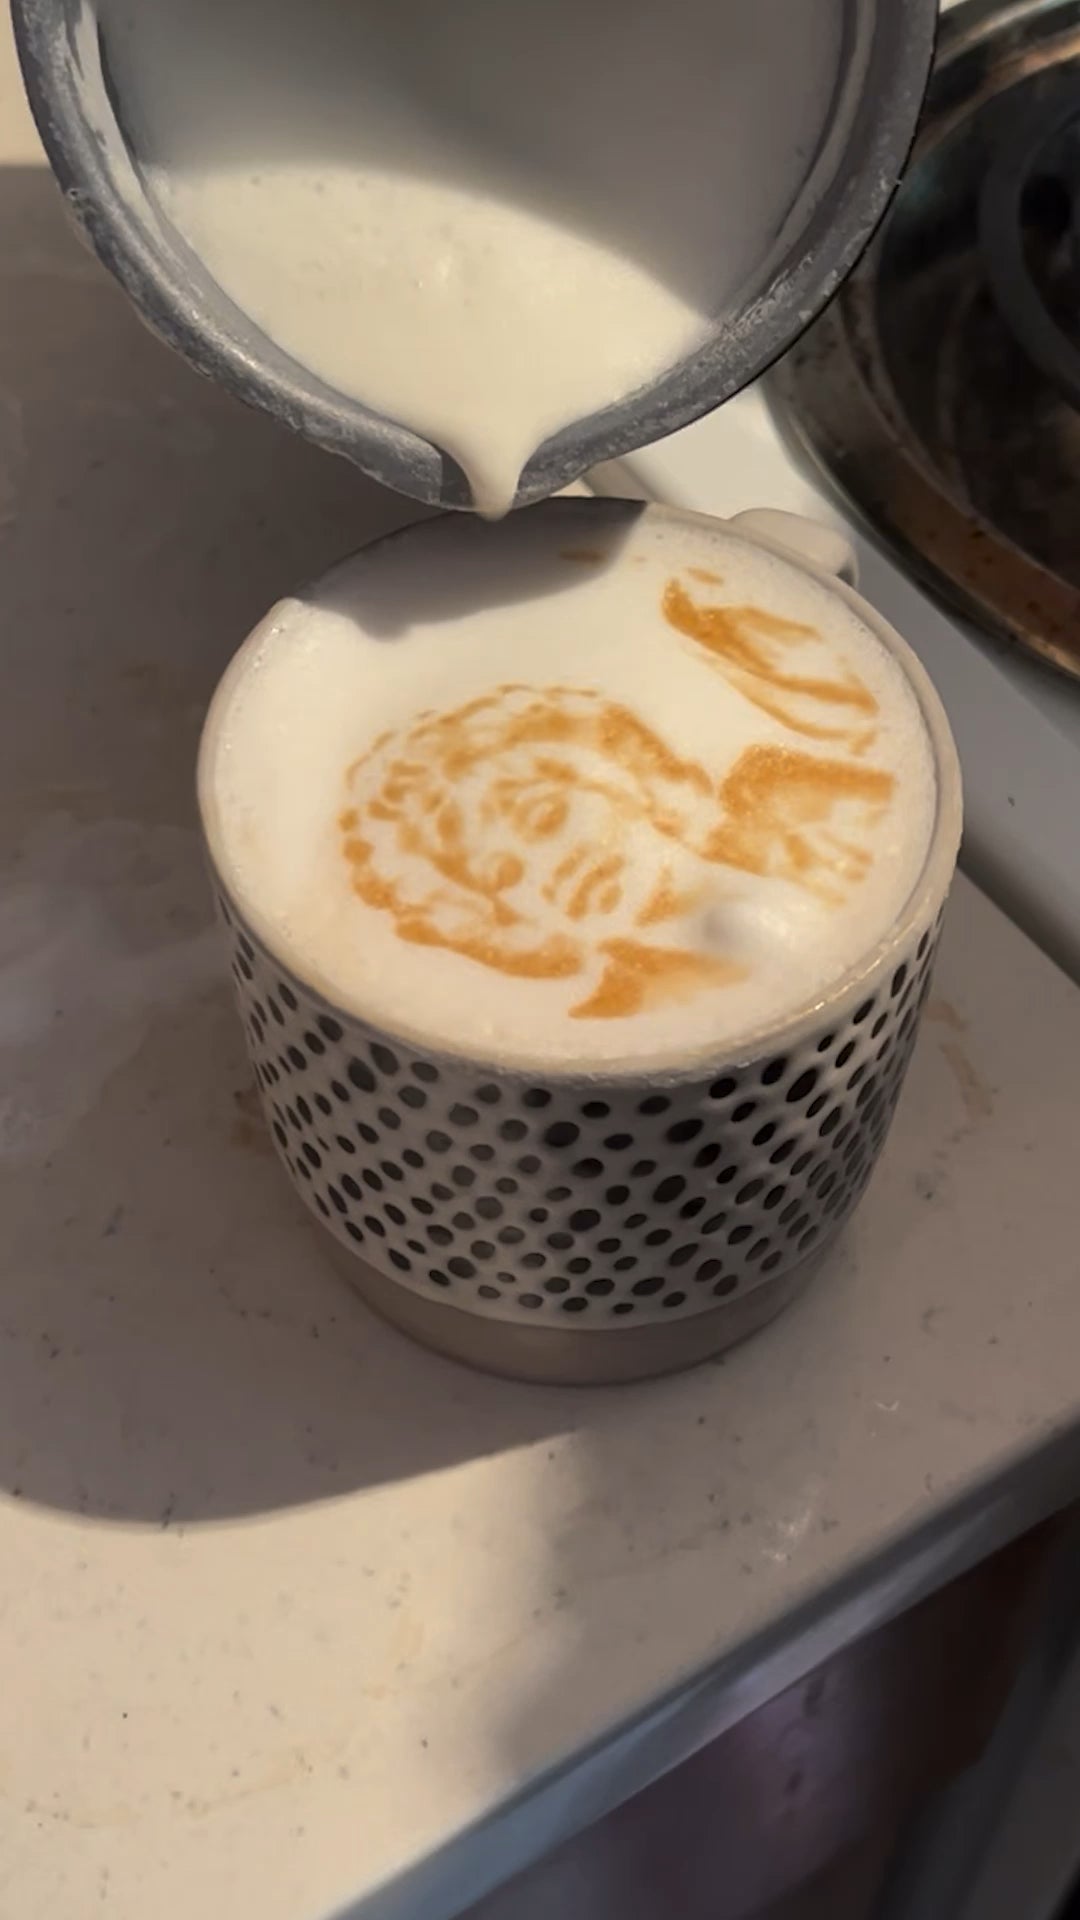 Dolly Parton’s 9-5 video recreated with 90 cups of latte art